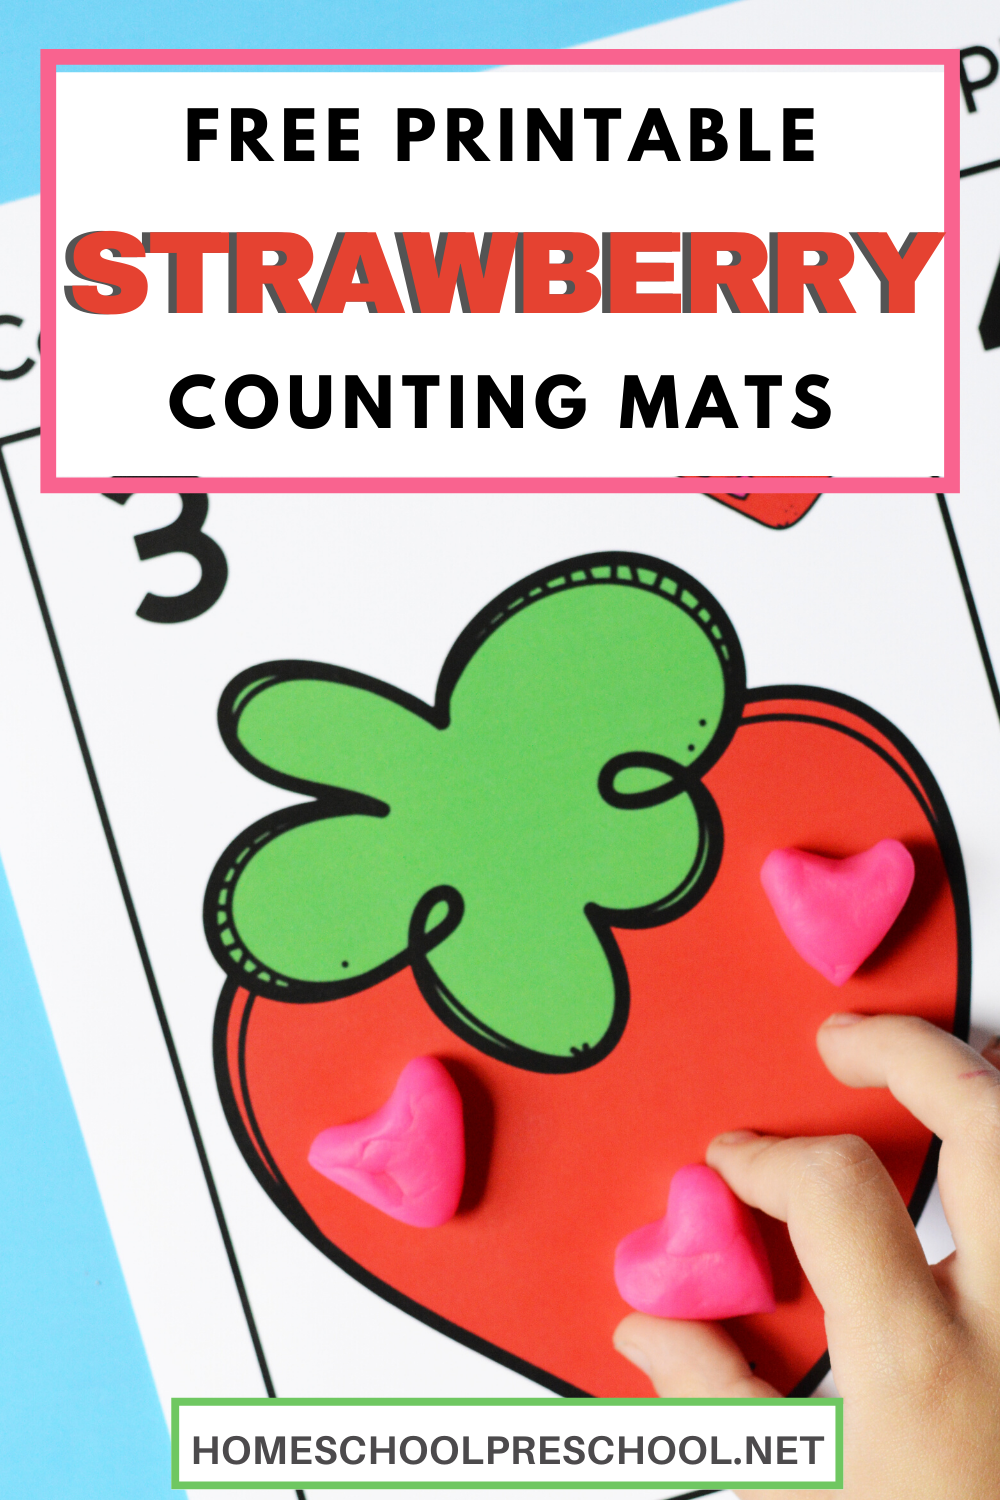 strawberry-mats-1 Count Your Buttons Day